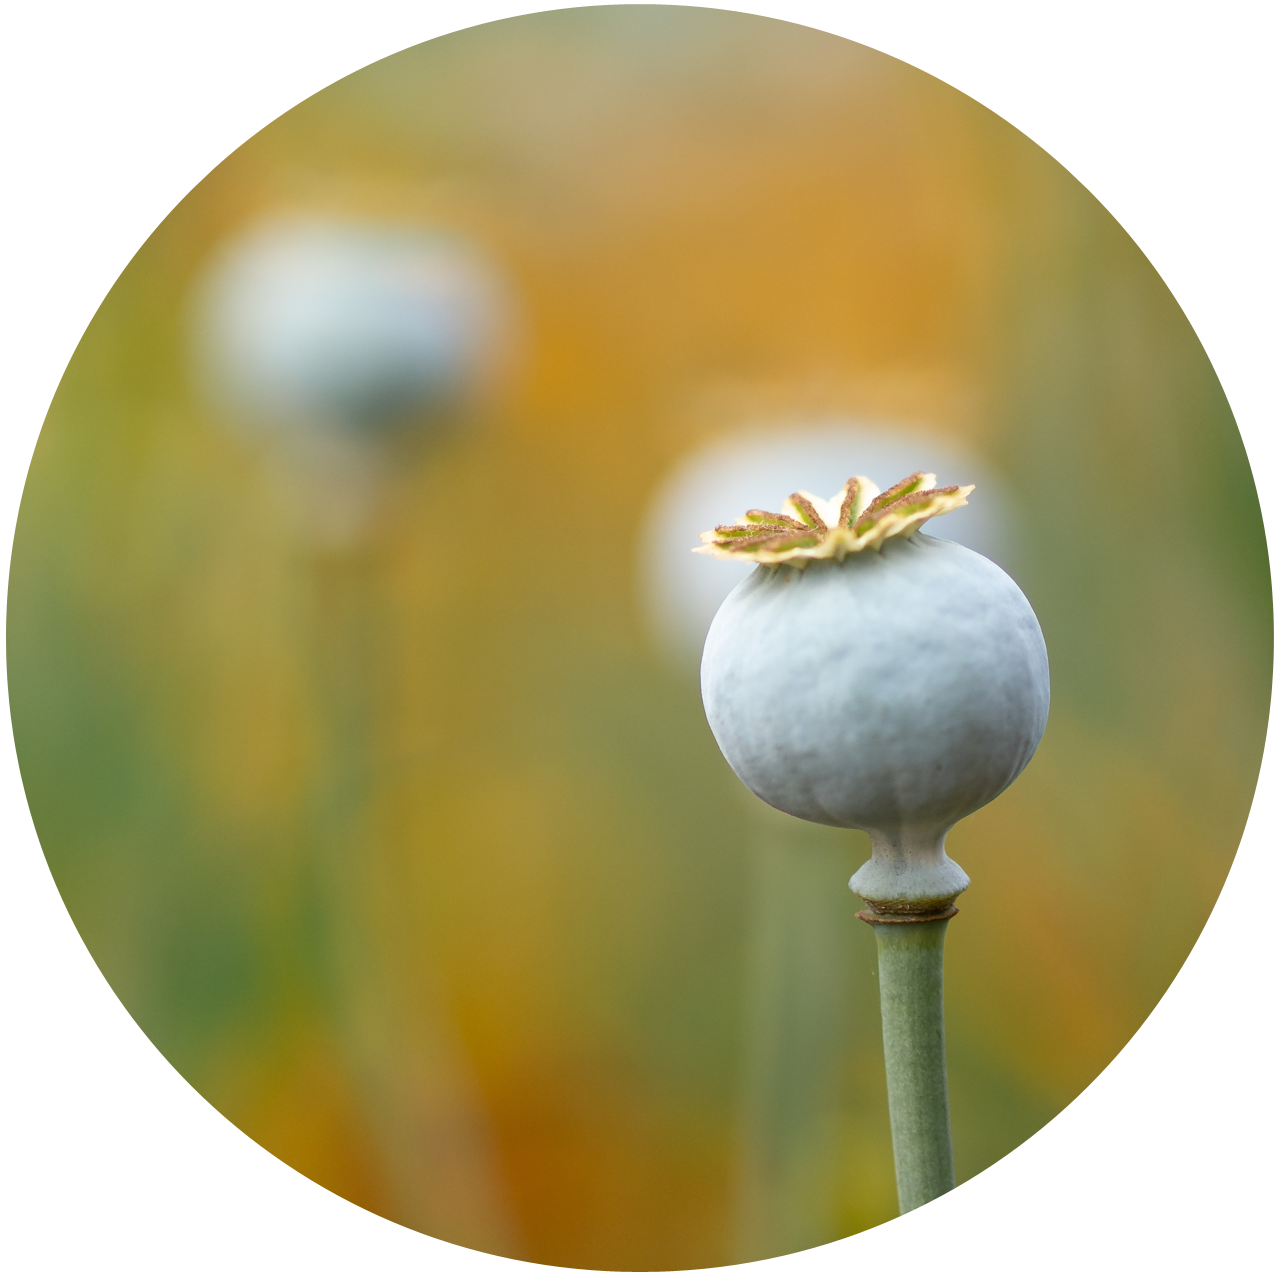 Poppy, Papaver sp. Powdery green round seed pod with scalloped disk on top.